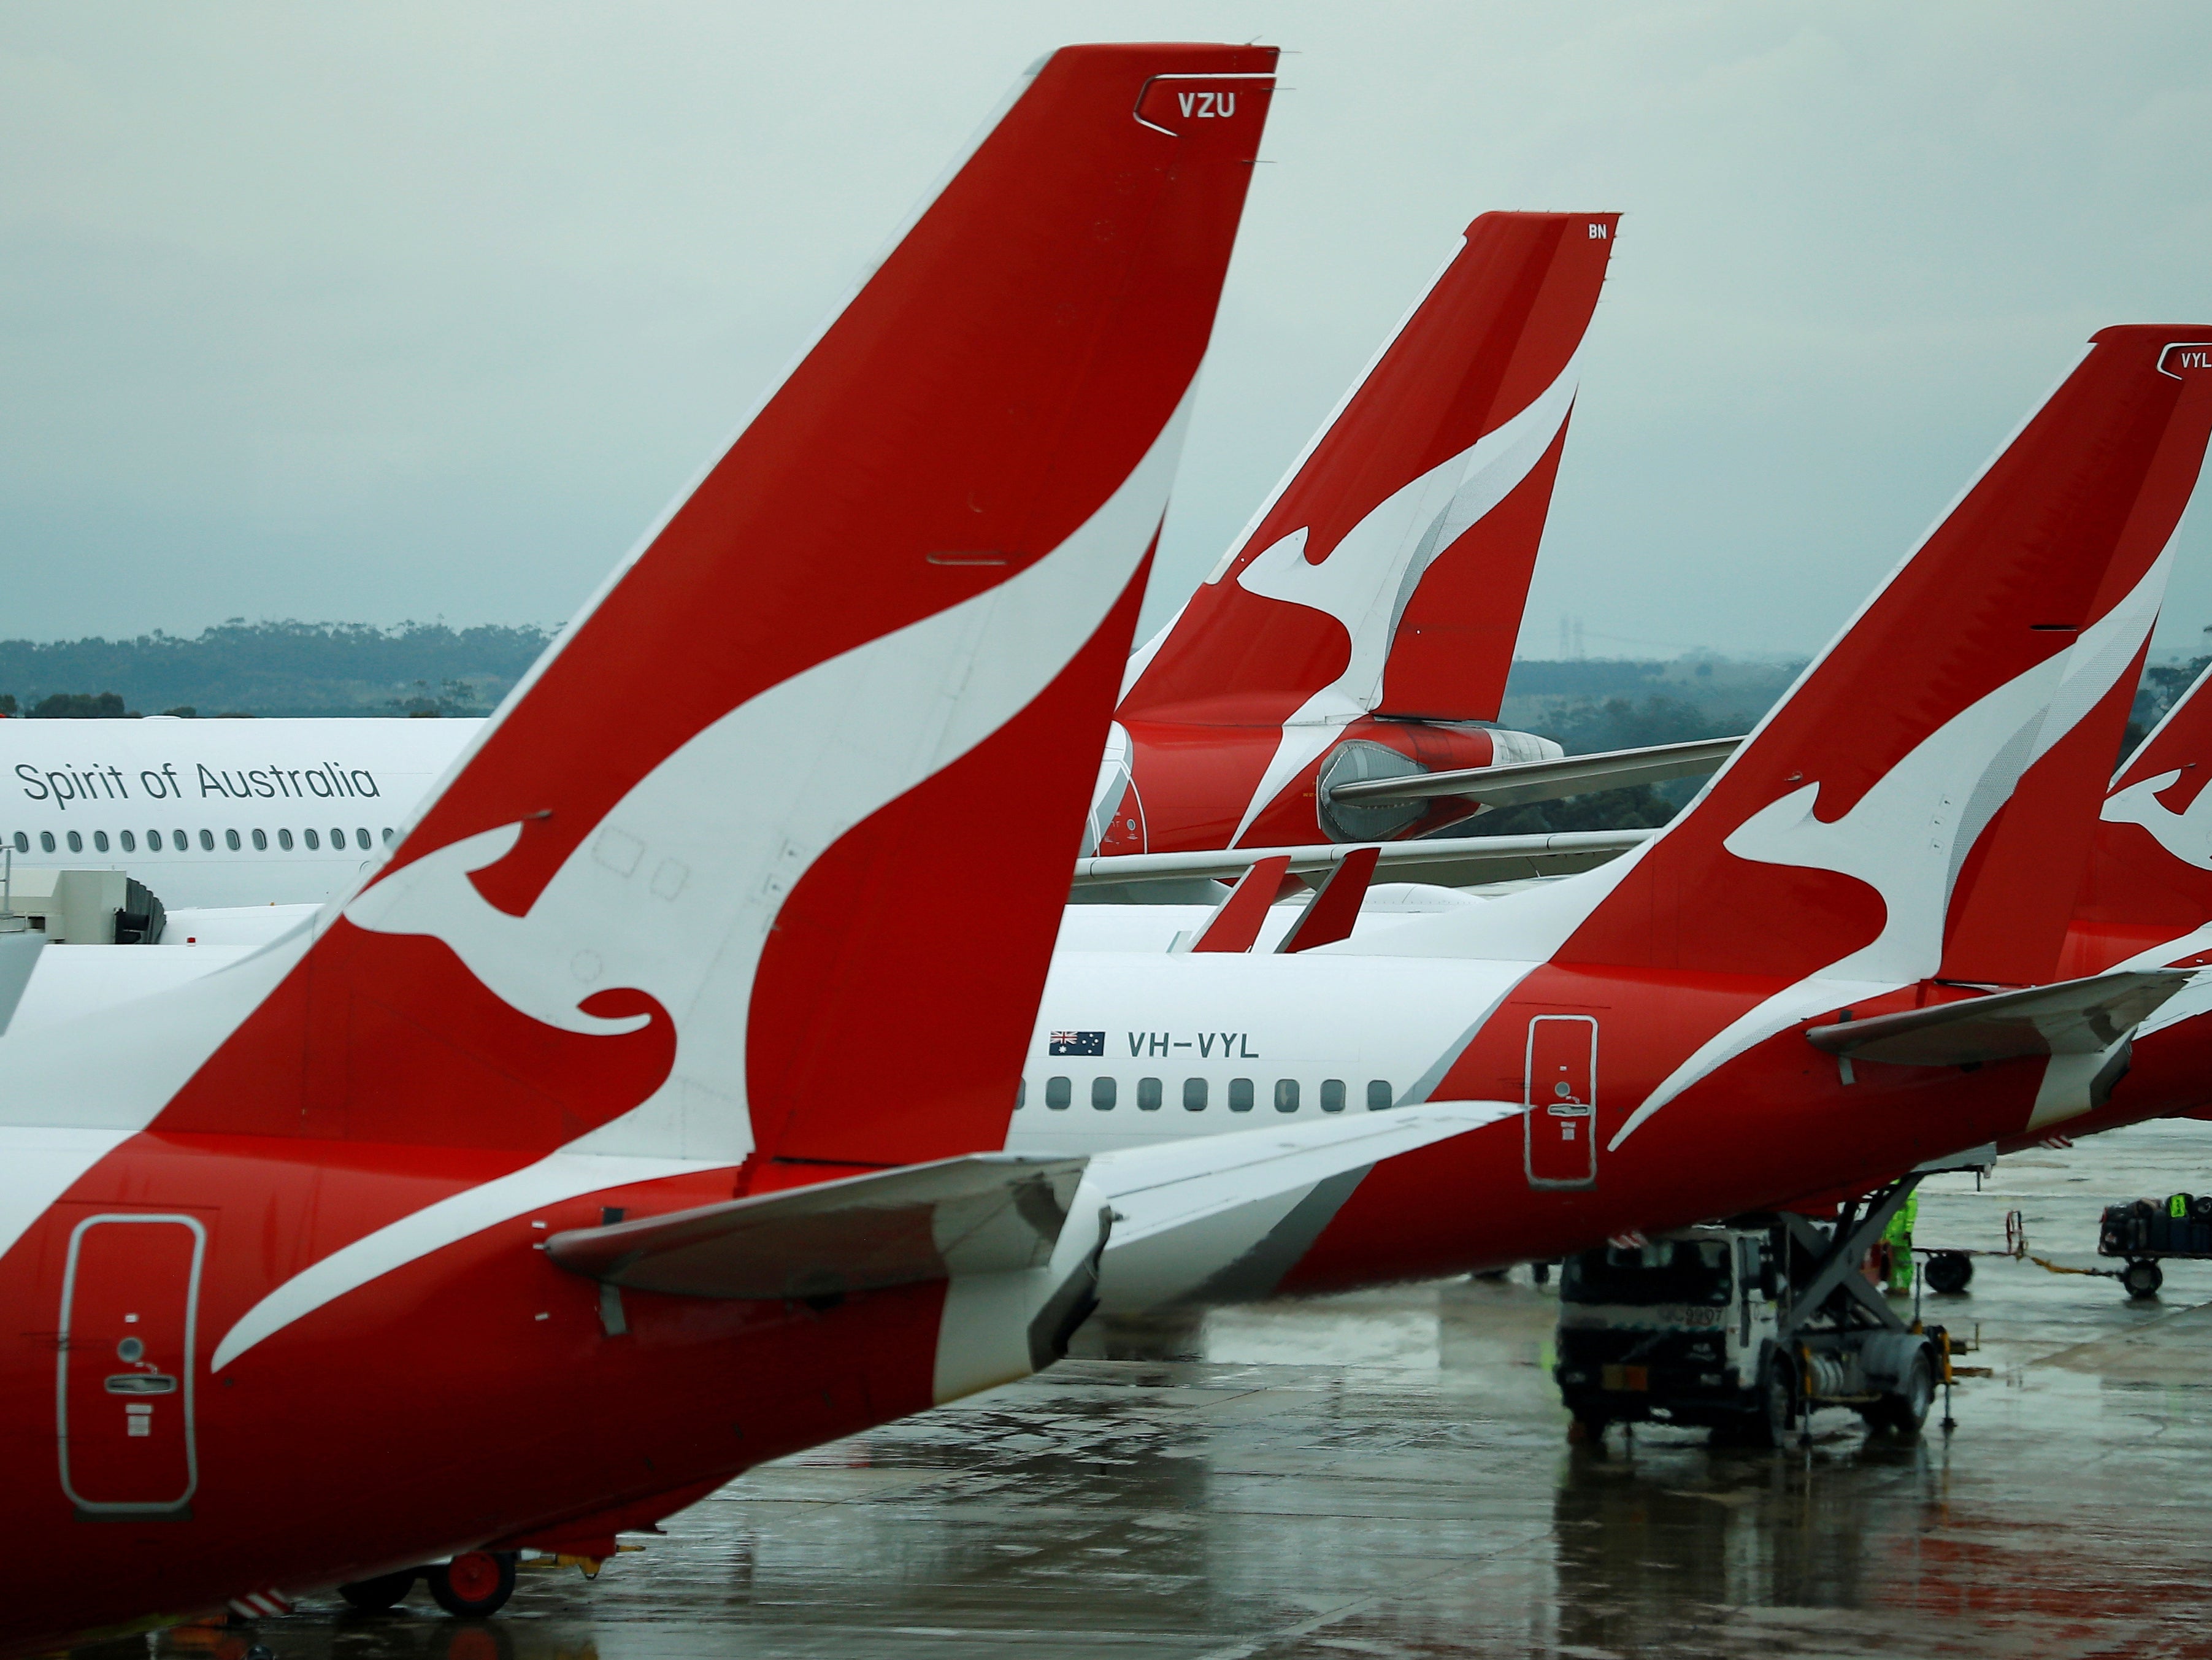 Qantas aircraft are seen on the tarmac at Melbourne International Airport in Melbourne, Australia